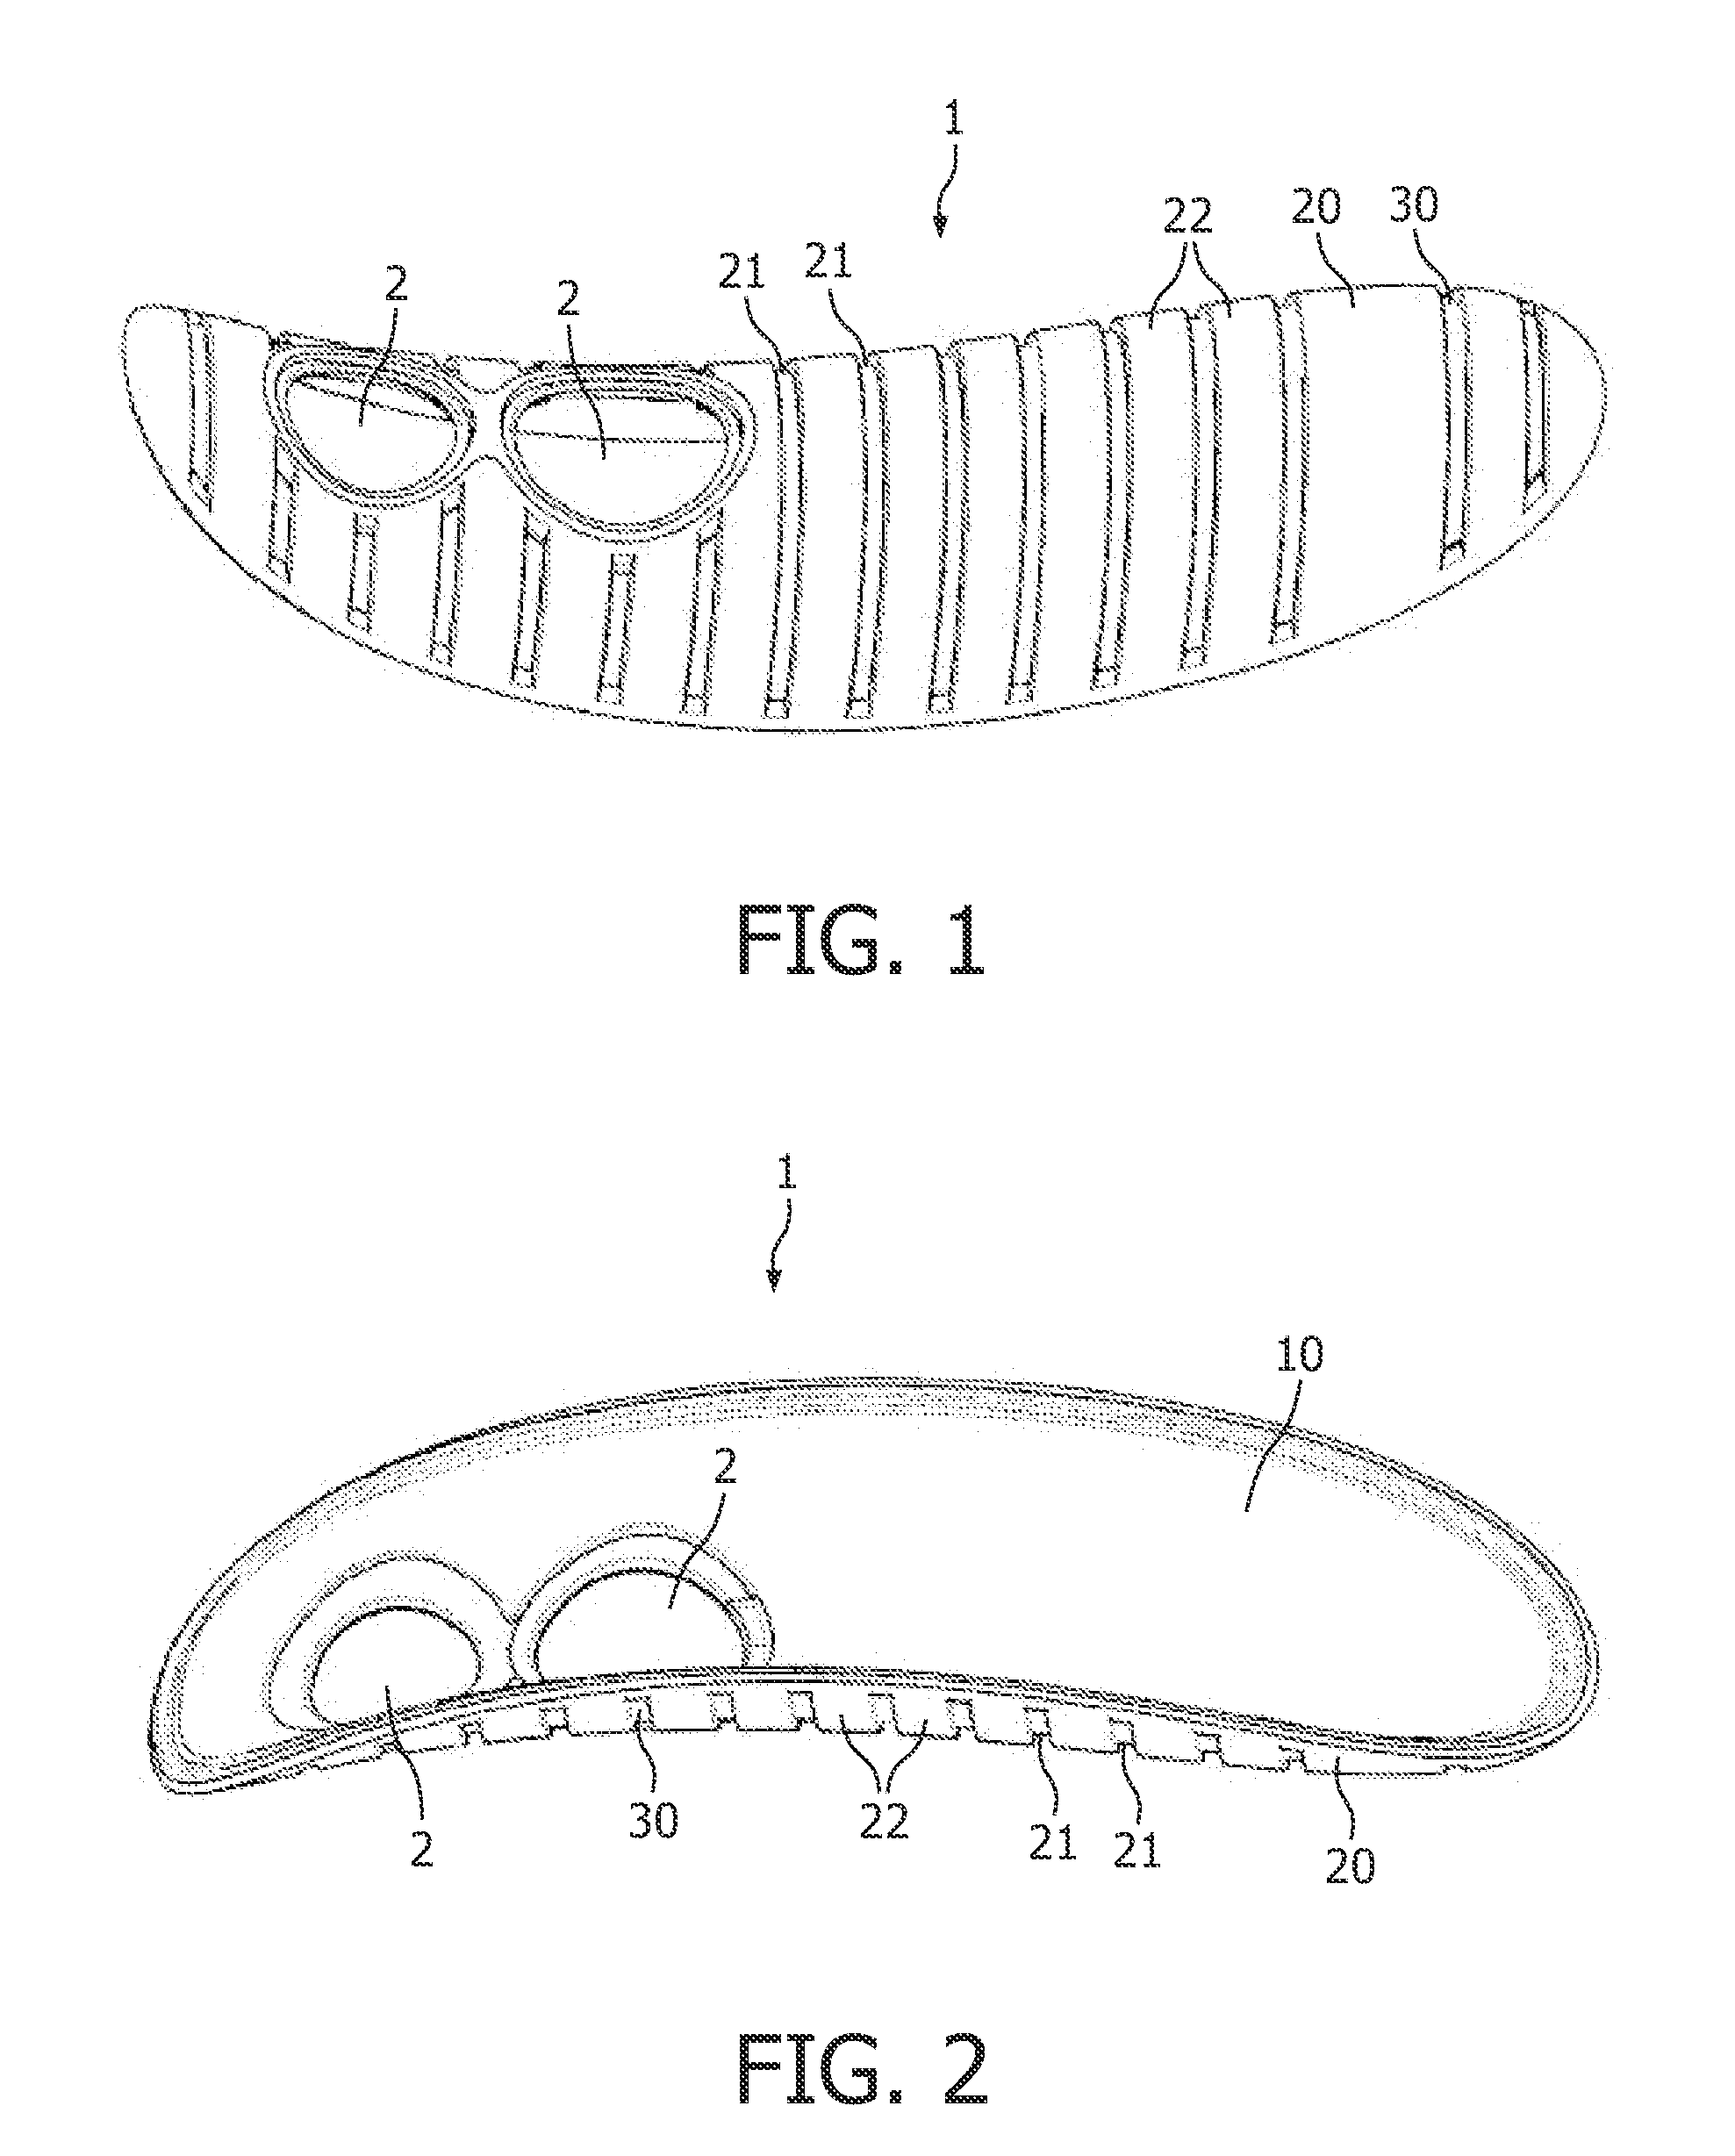 Method for manufacturing a housing element having a decorative covering and a grip layer